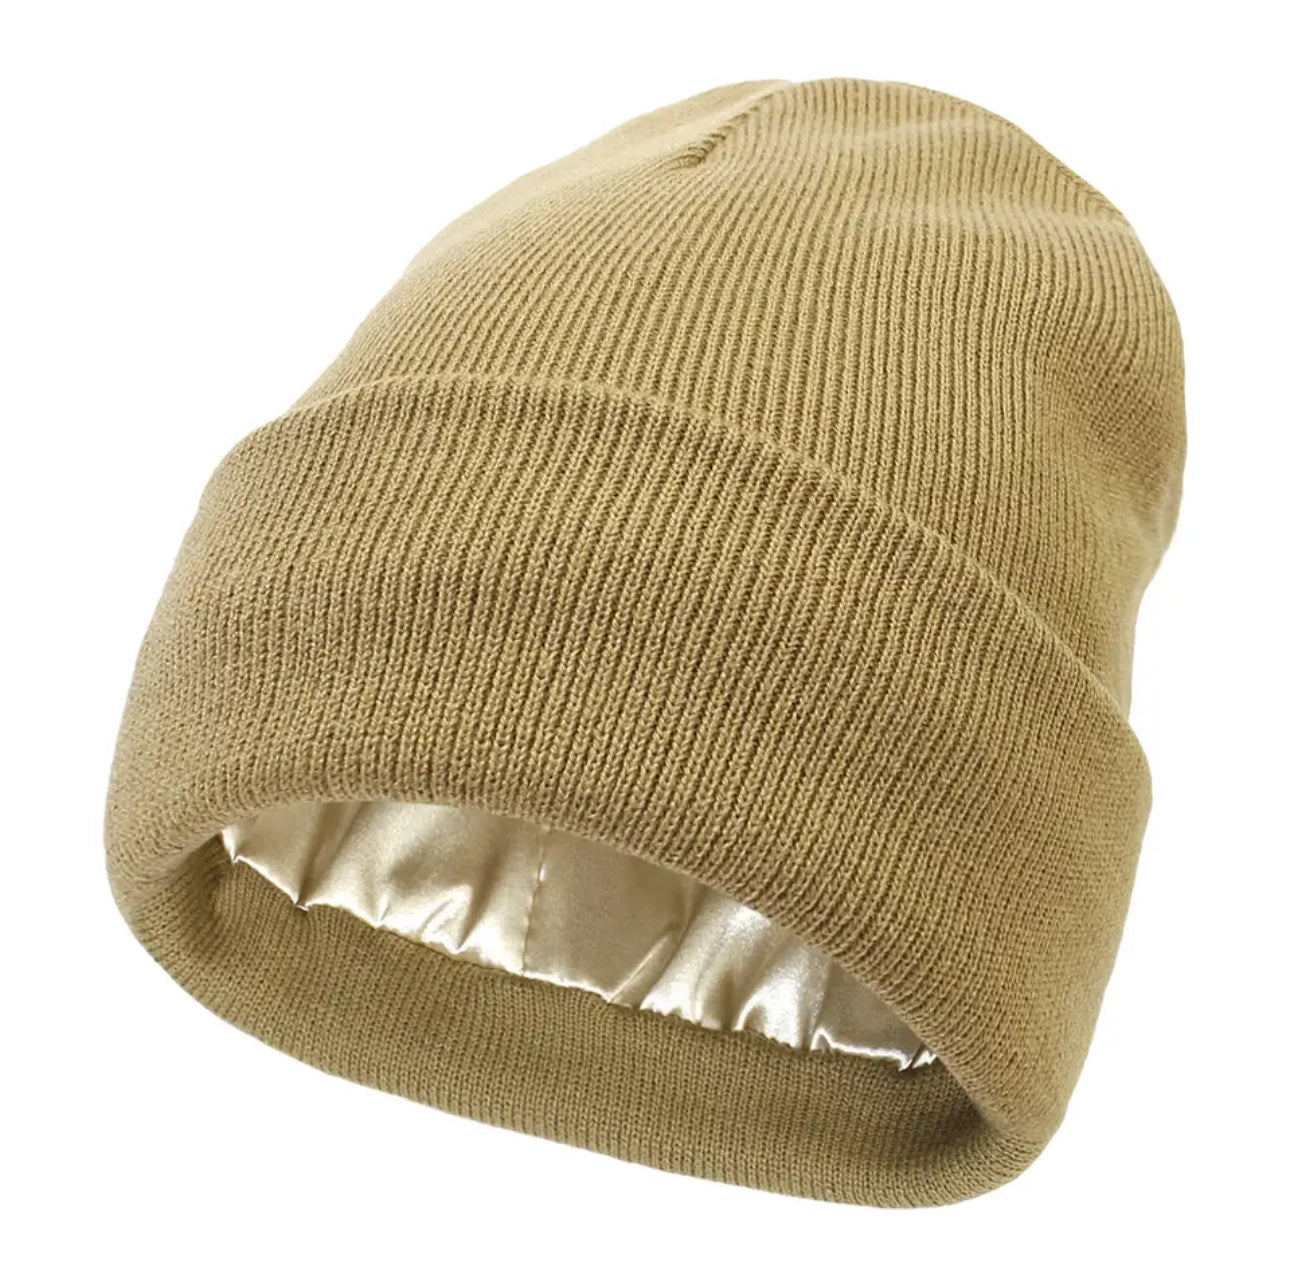 Satin Lined Toques